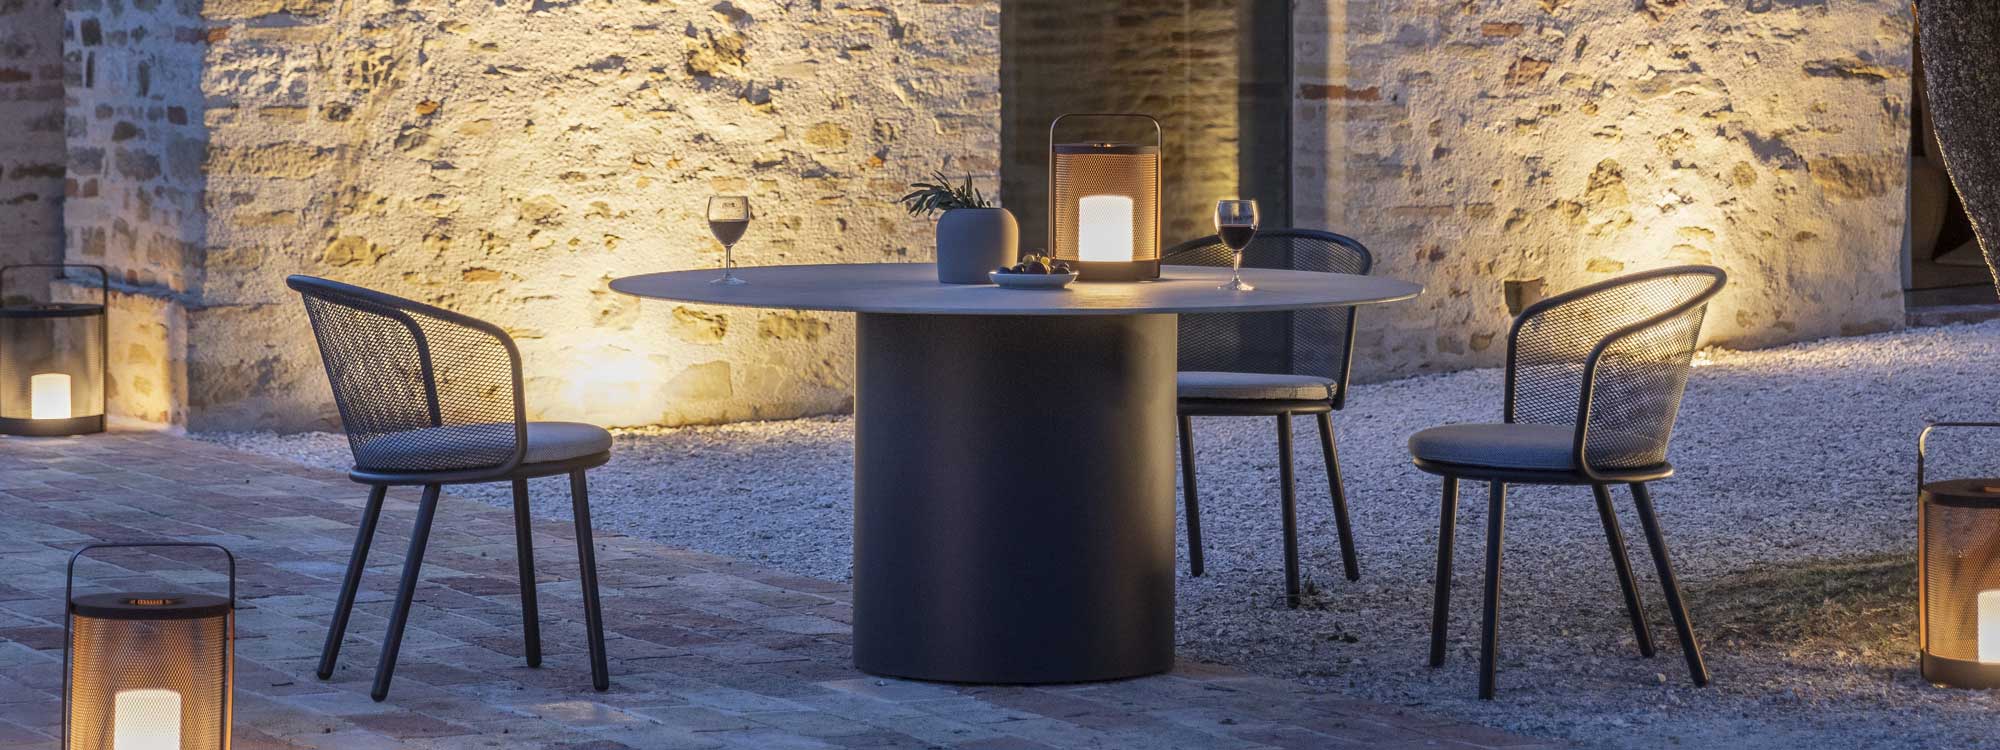 Image of balmy courtyard in light of dusk with Branta round garden table and Baza garden chairs in dark grey